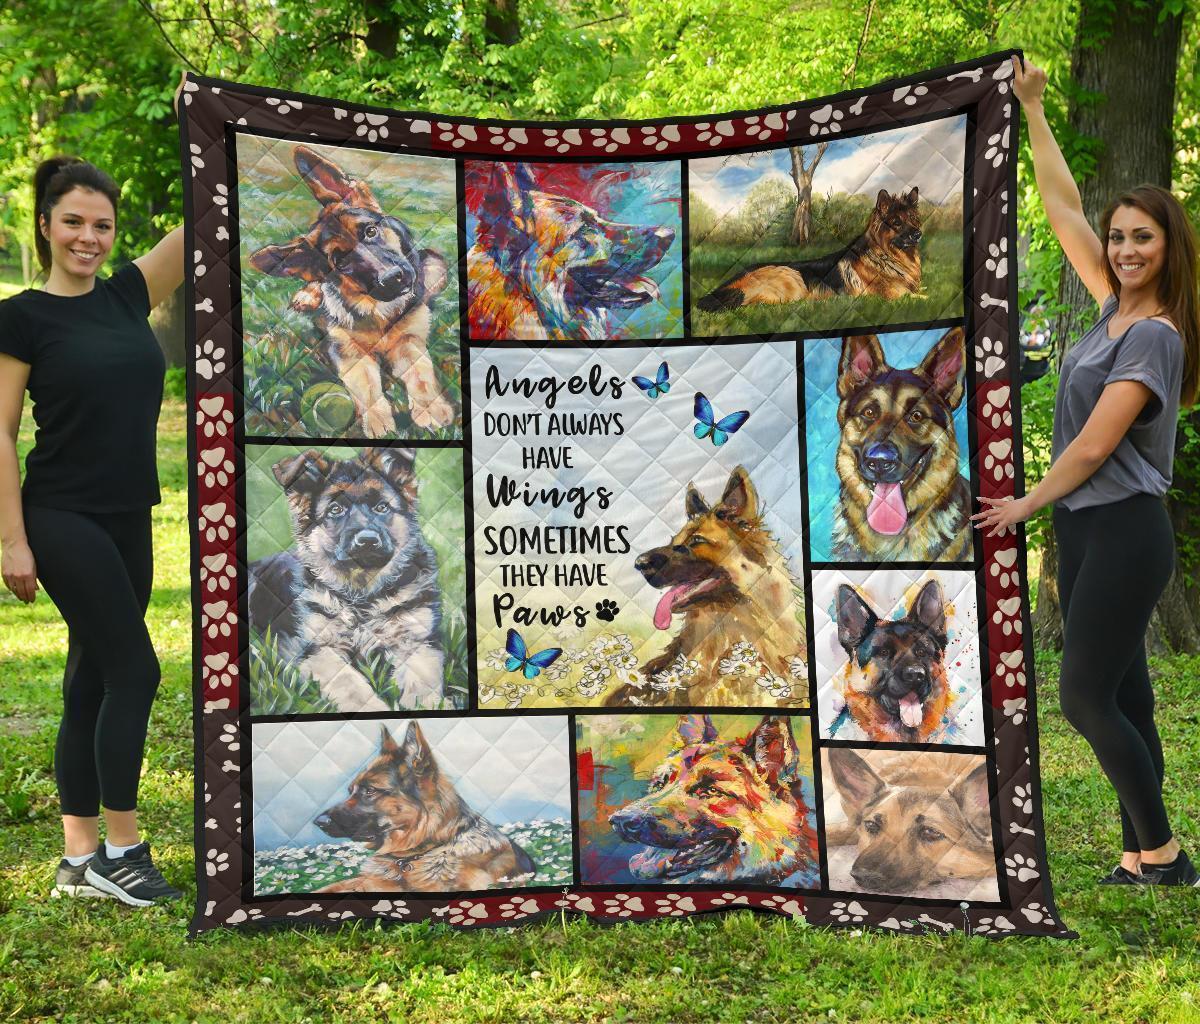 Germand Shepherd Dog Quilt Blanket Angels Sometime Have Paws-Gear Wanta